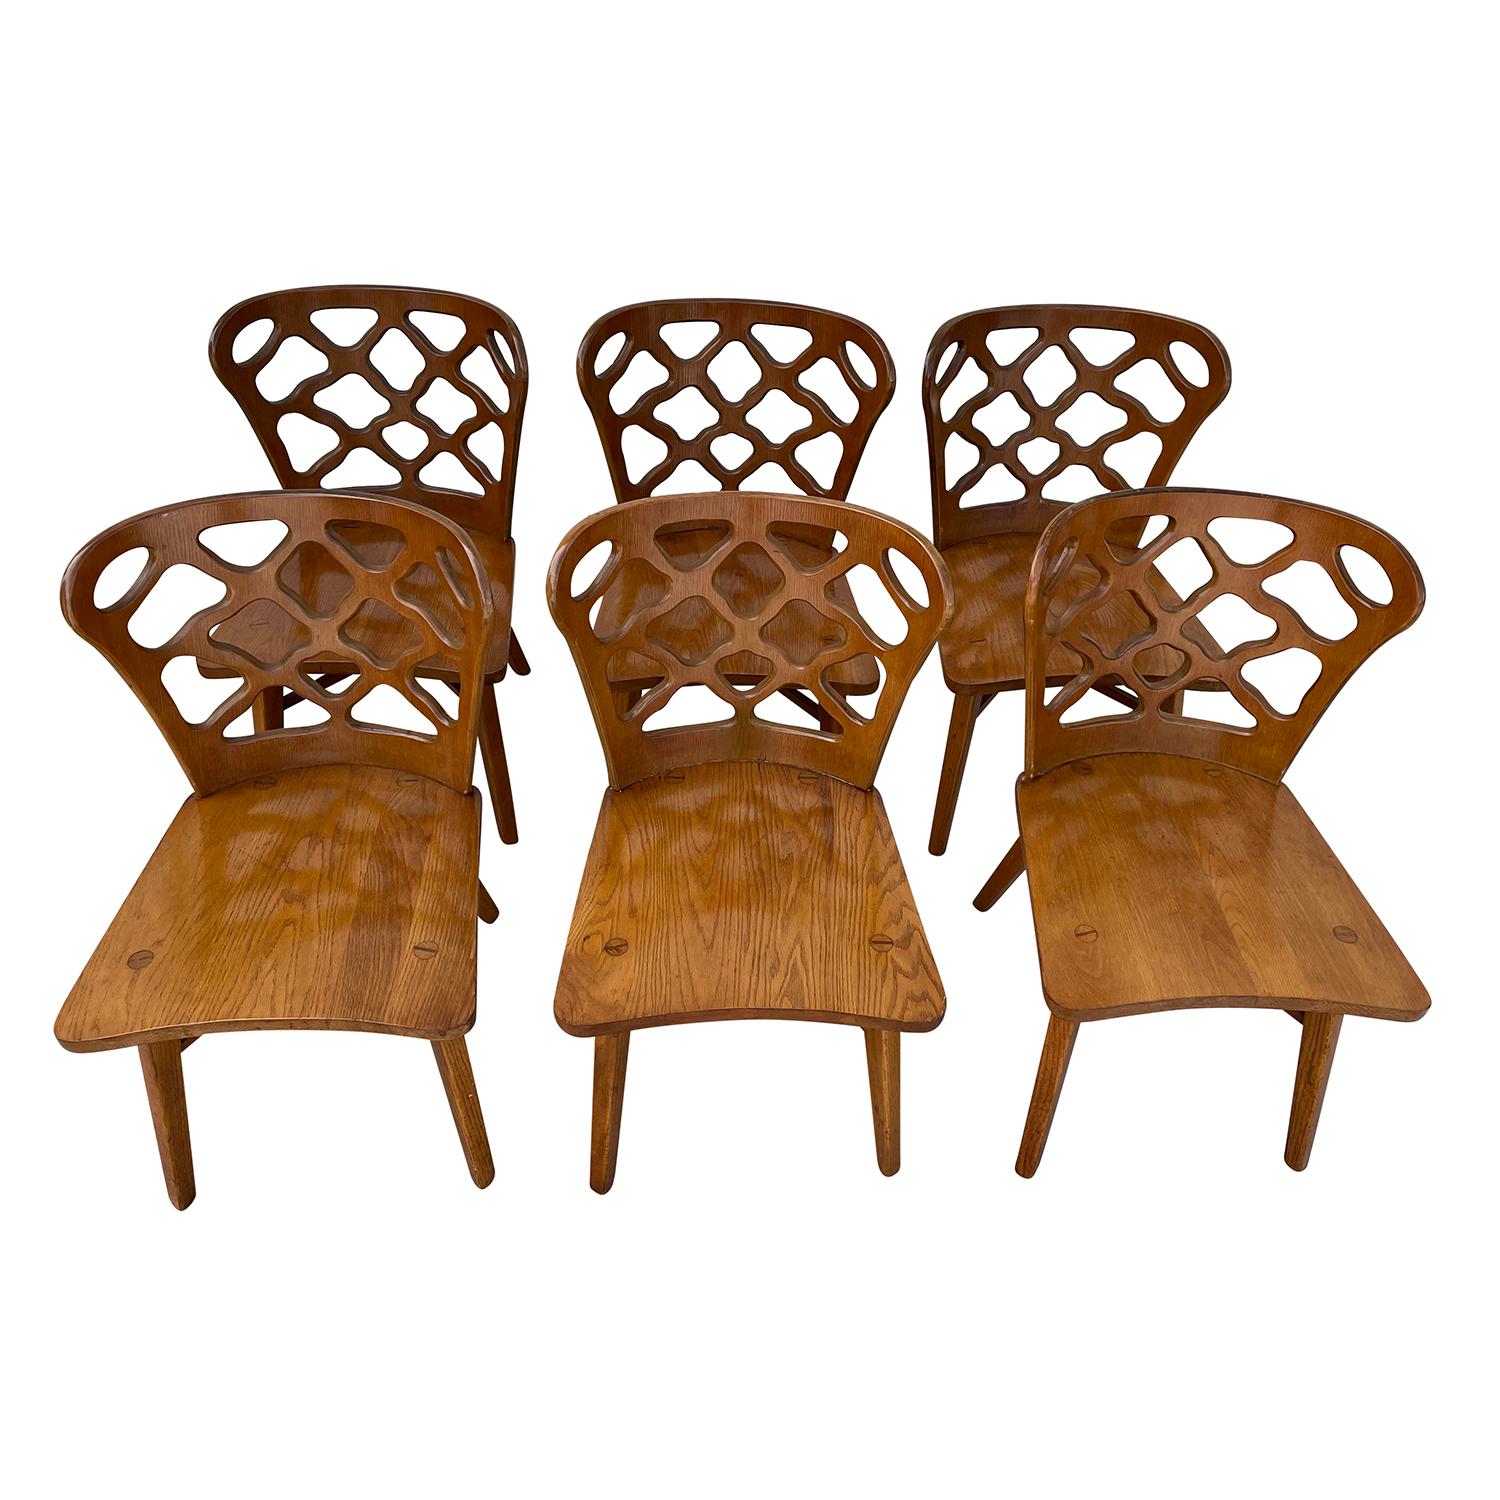 A dark-brown, vintage Mid-Century Modern American set of six dining chairs made of hand carved Oakwood and Bent Plywood, designed and produced by RomWeber in good condition. The back rest of each side chair is slightly curved to the inside with